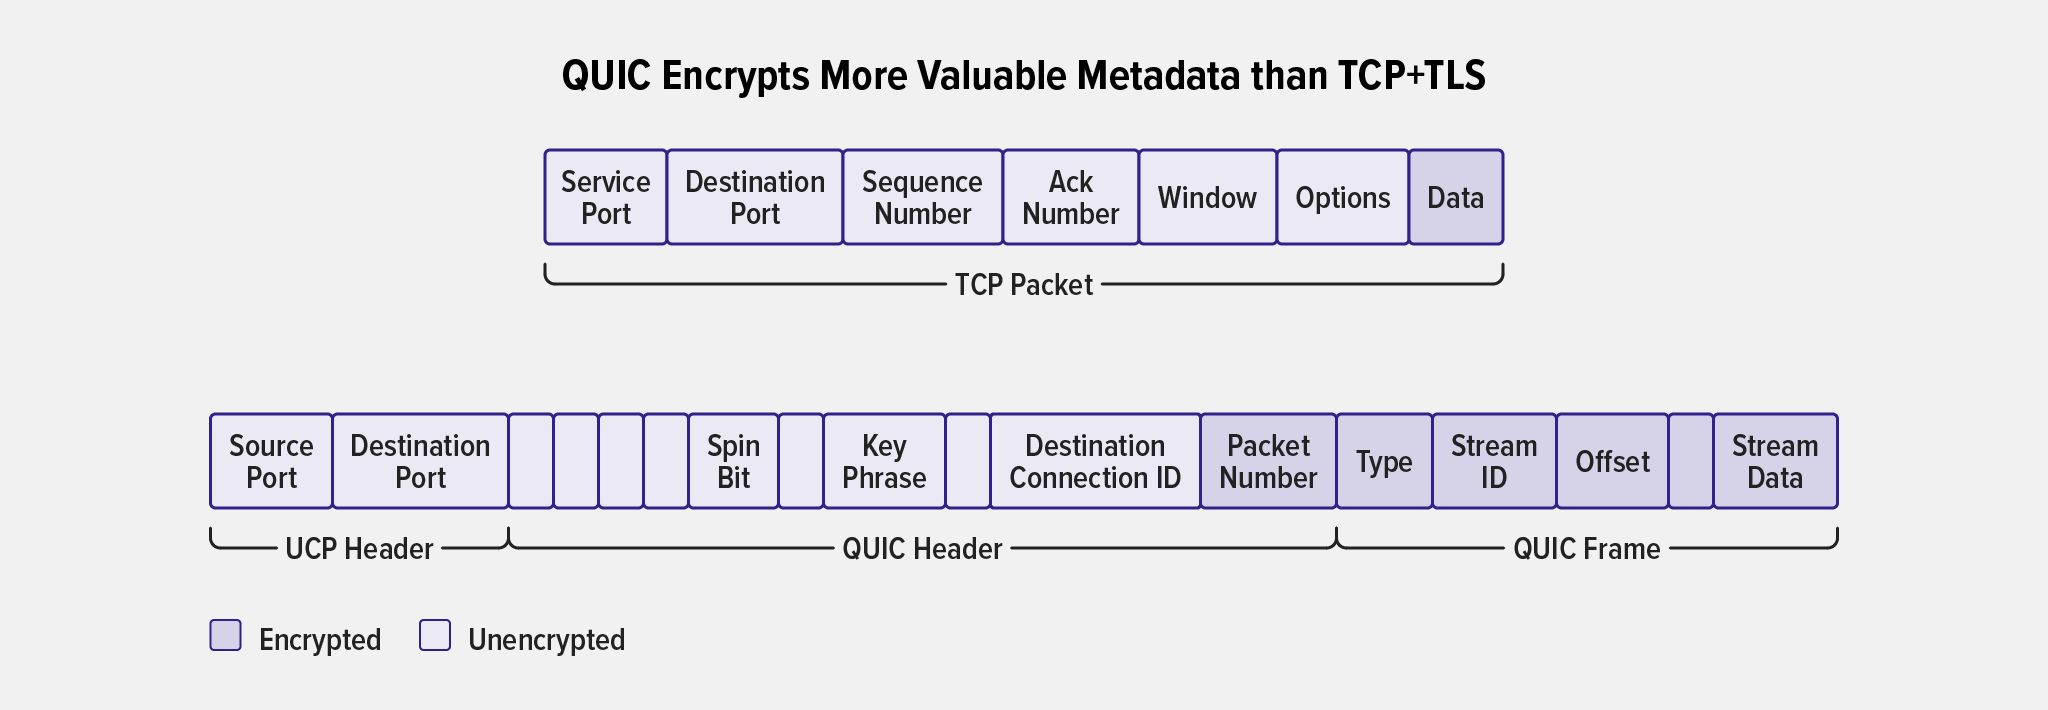 Diagram showing how much more data is encrypted in a QUIC datagram than in a TCP packet for HTTP/1 and HTTP/2